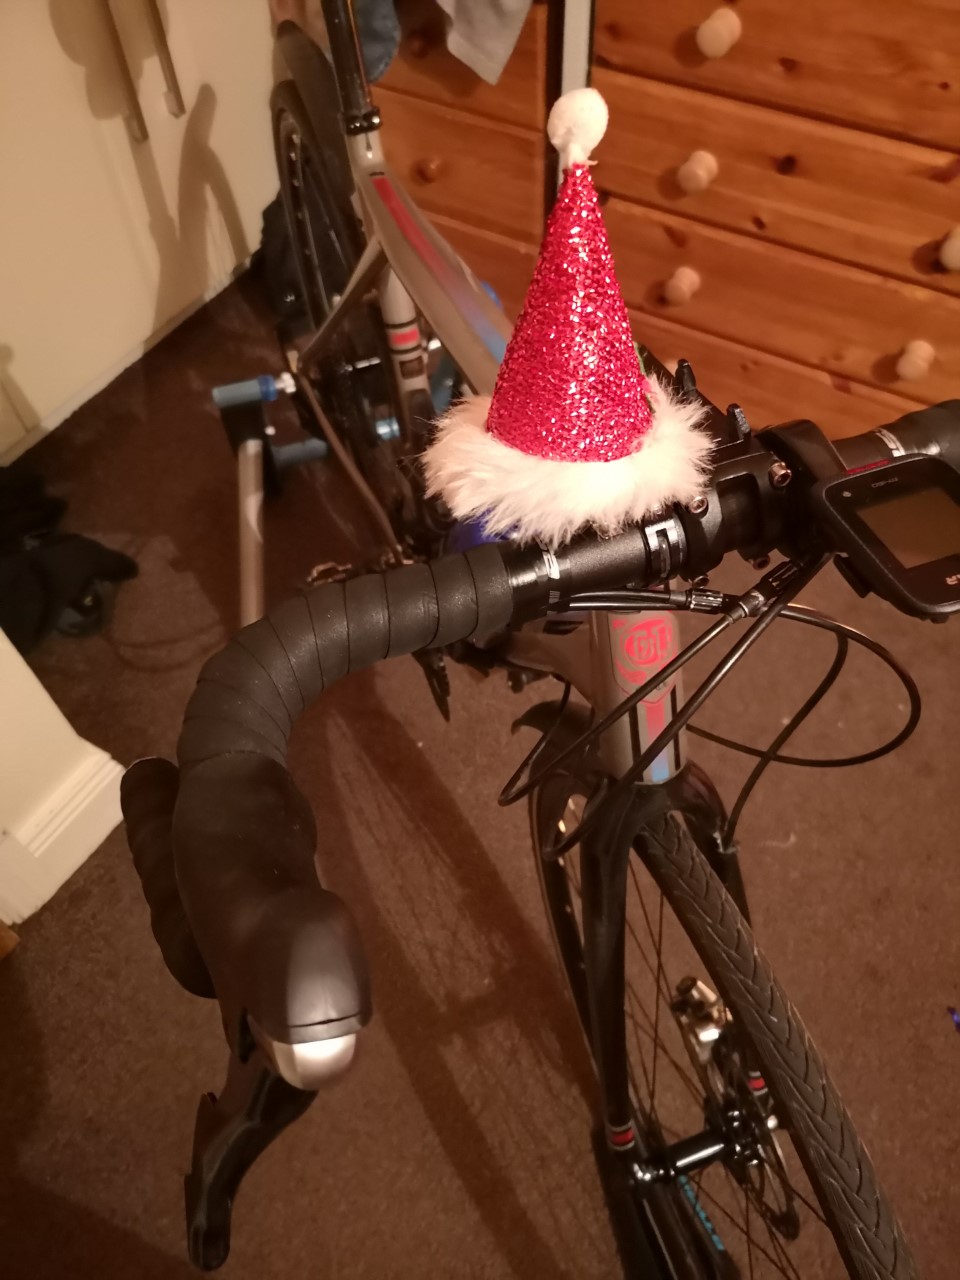 Solo Ride December 11th - 7th Day of Festive Rides!